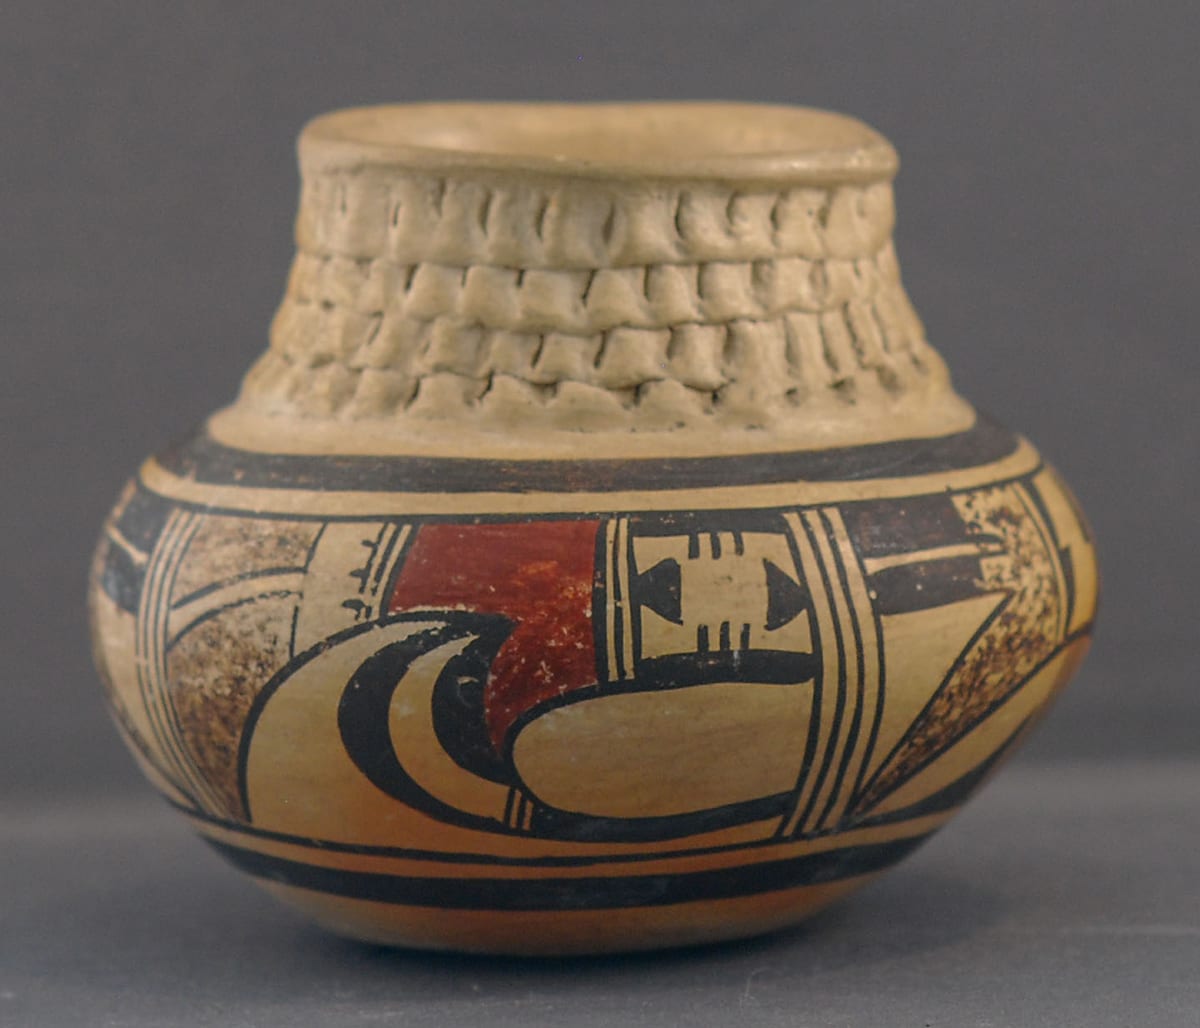 2012-14 Jar with Corrugated Neck and Polychromatic Avian Designs